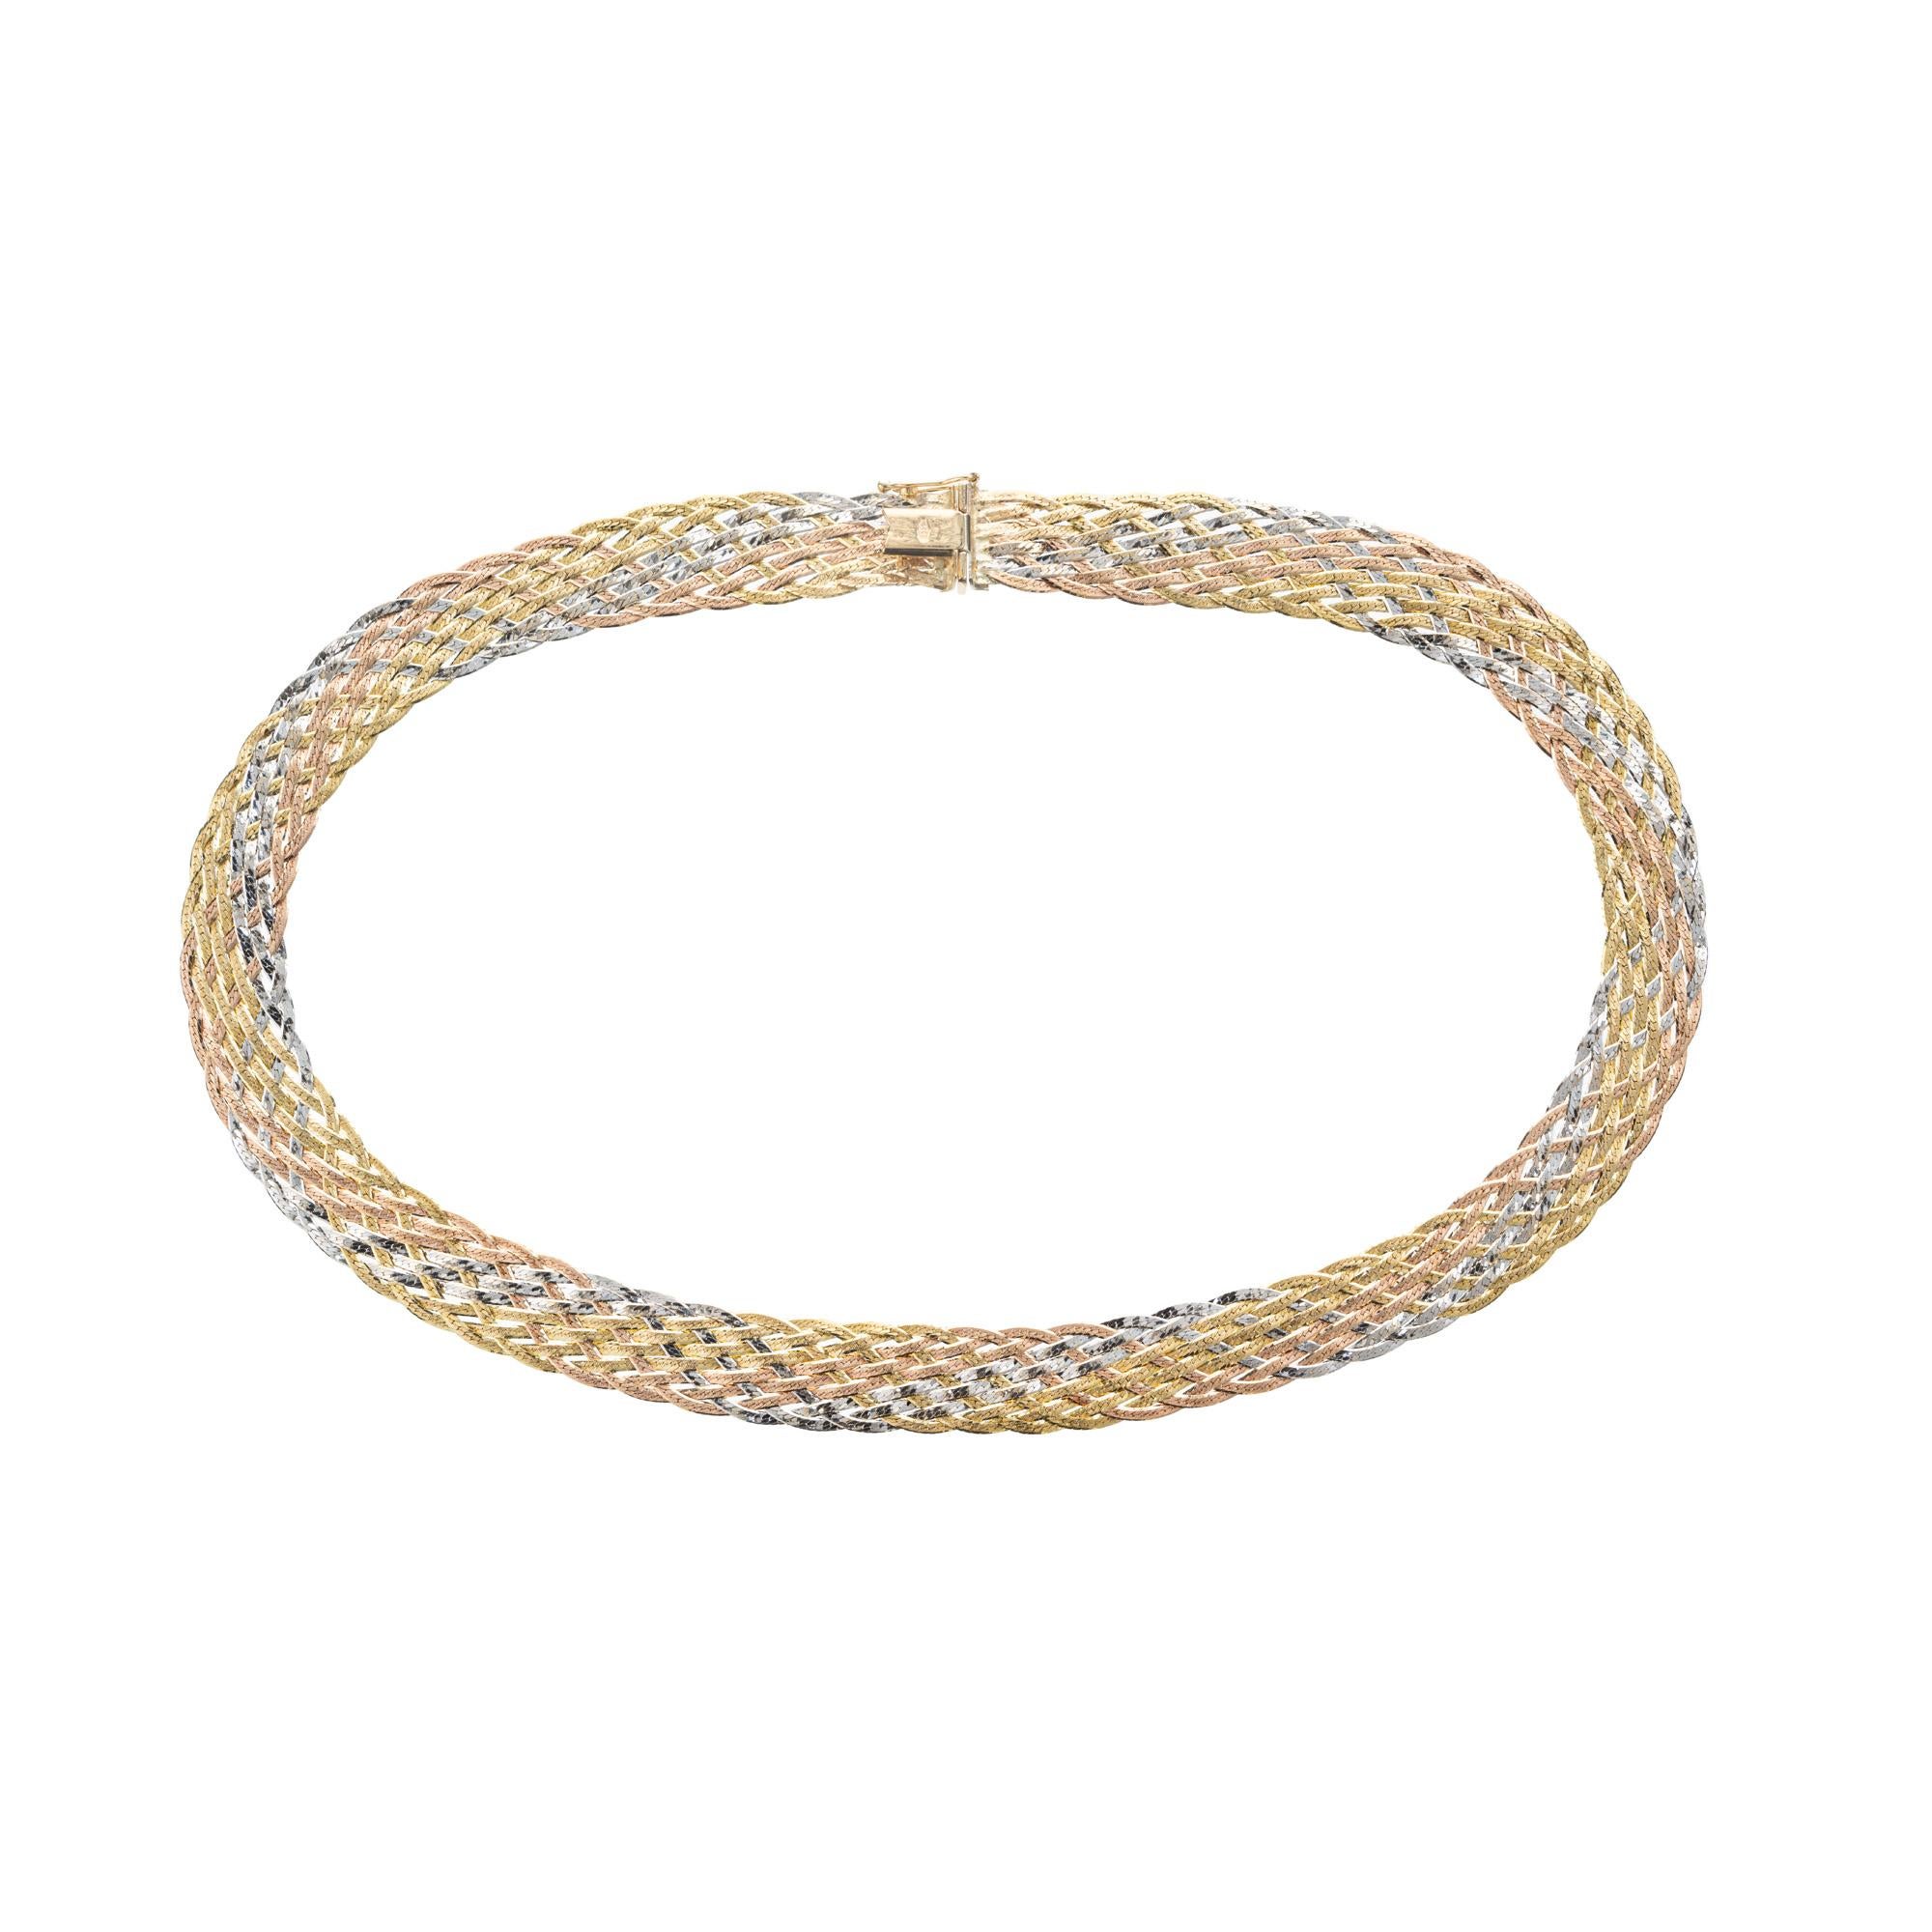 Tri Color Gold Mesh Necklace. This necklace is a harmonious blend of 14k white, yellow, and rose gold links intricately woven together, forming a stunning mesh pattern that is both elegant and contemporary. The necklace is 16 inches in length.